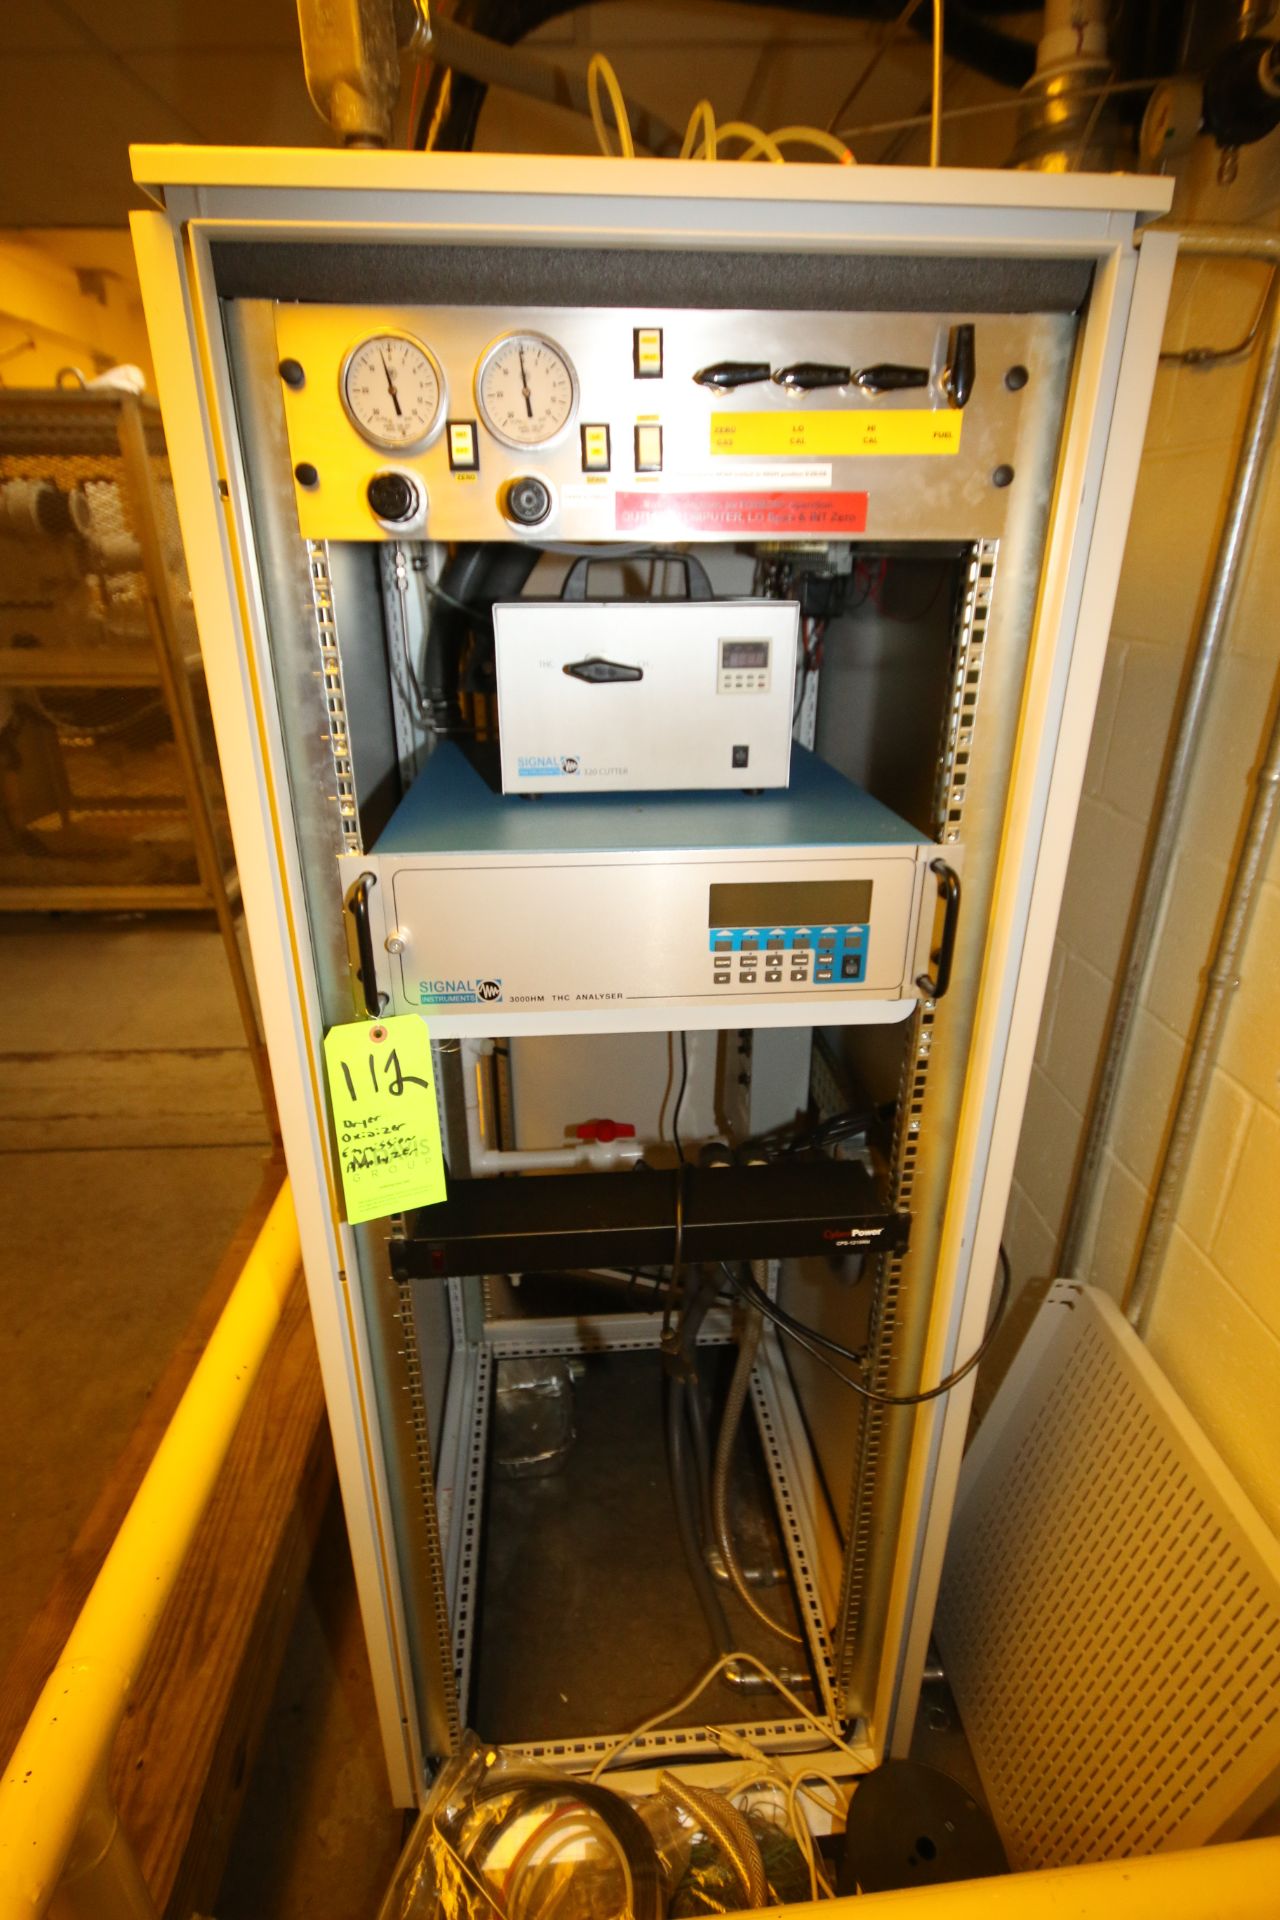 Dryer Oxidizer Emission Safety Analyzer Control Cabinet with Signal Instruments 320 Cutter and (2) - Image 2 of 6